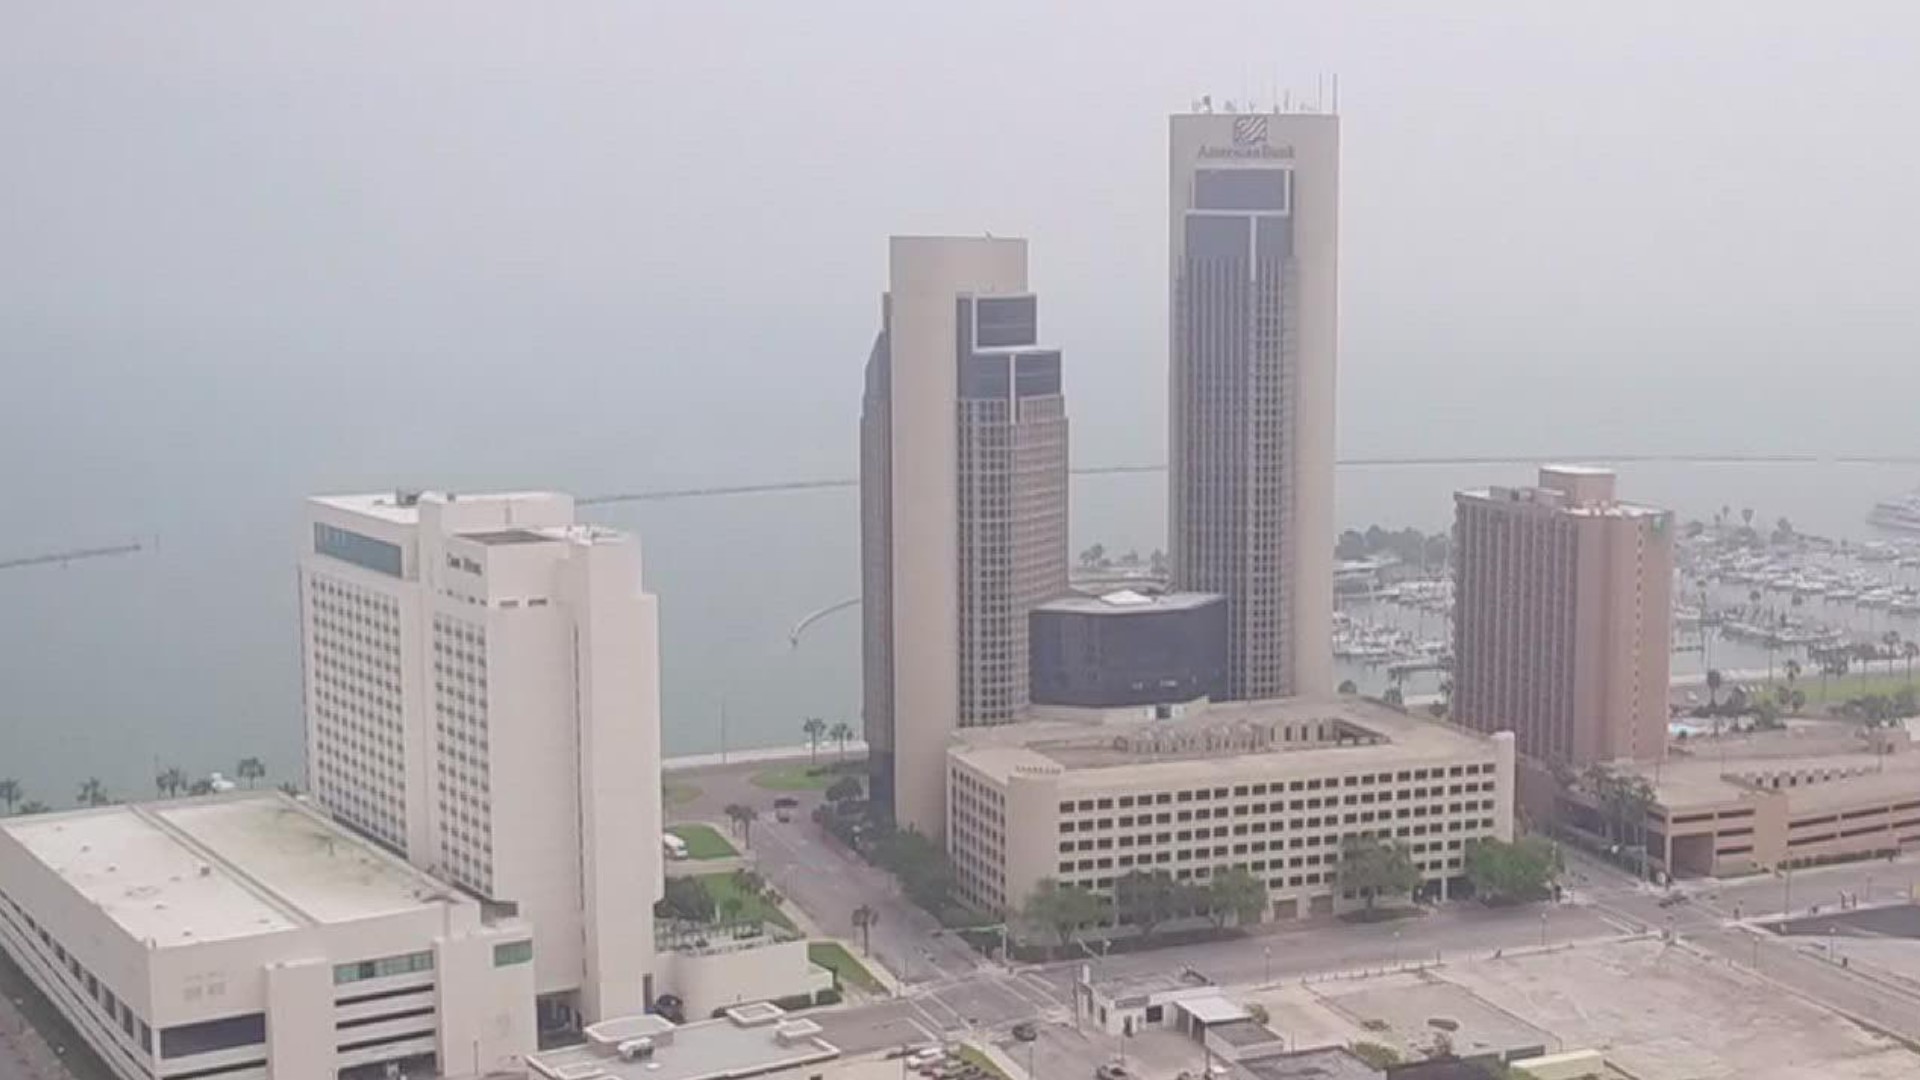 In their annual report, the city of Corpus Christi proudly announces over 100,000 visitors during the year.